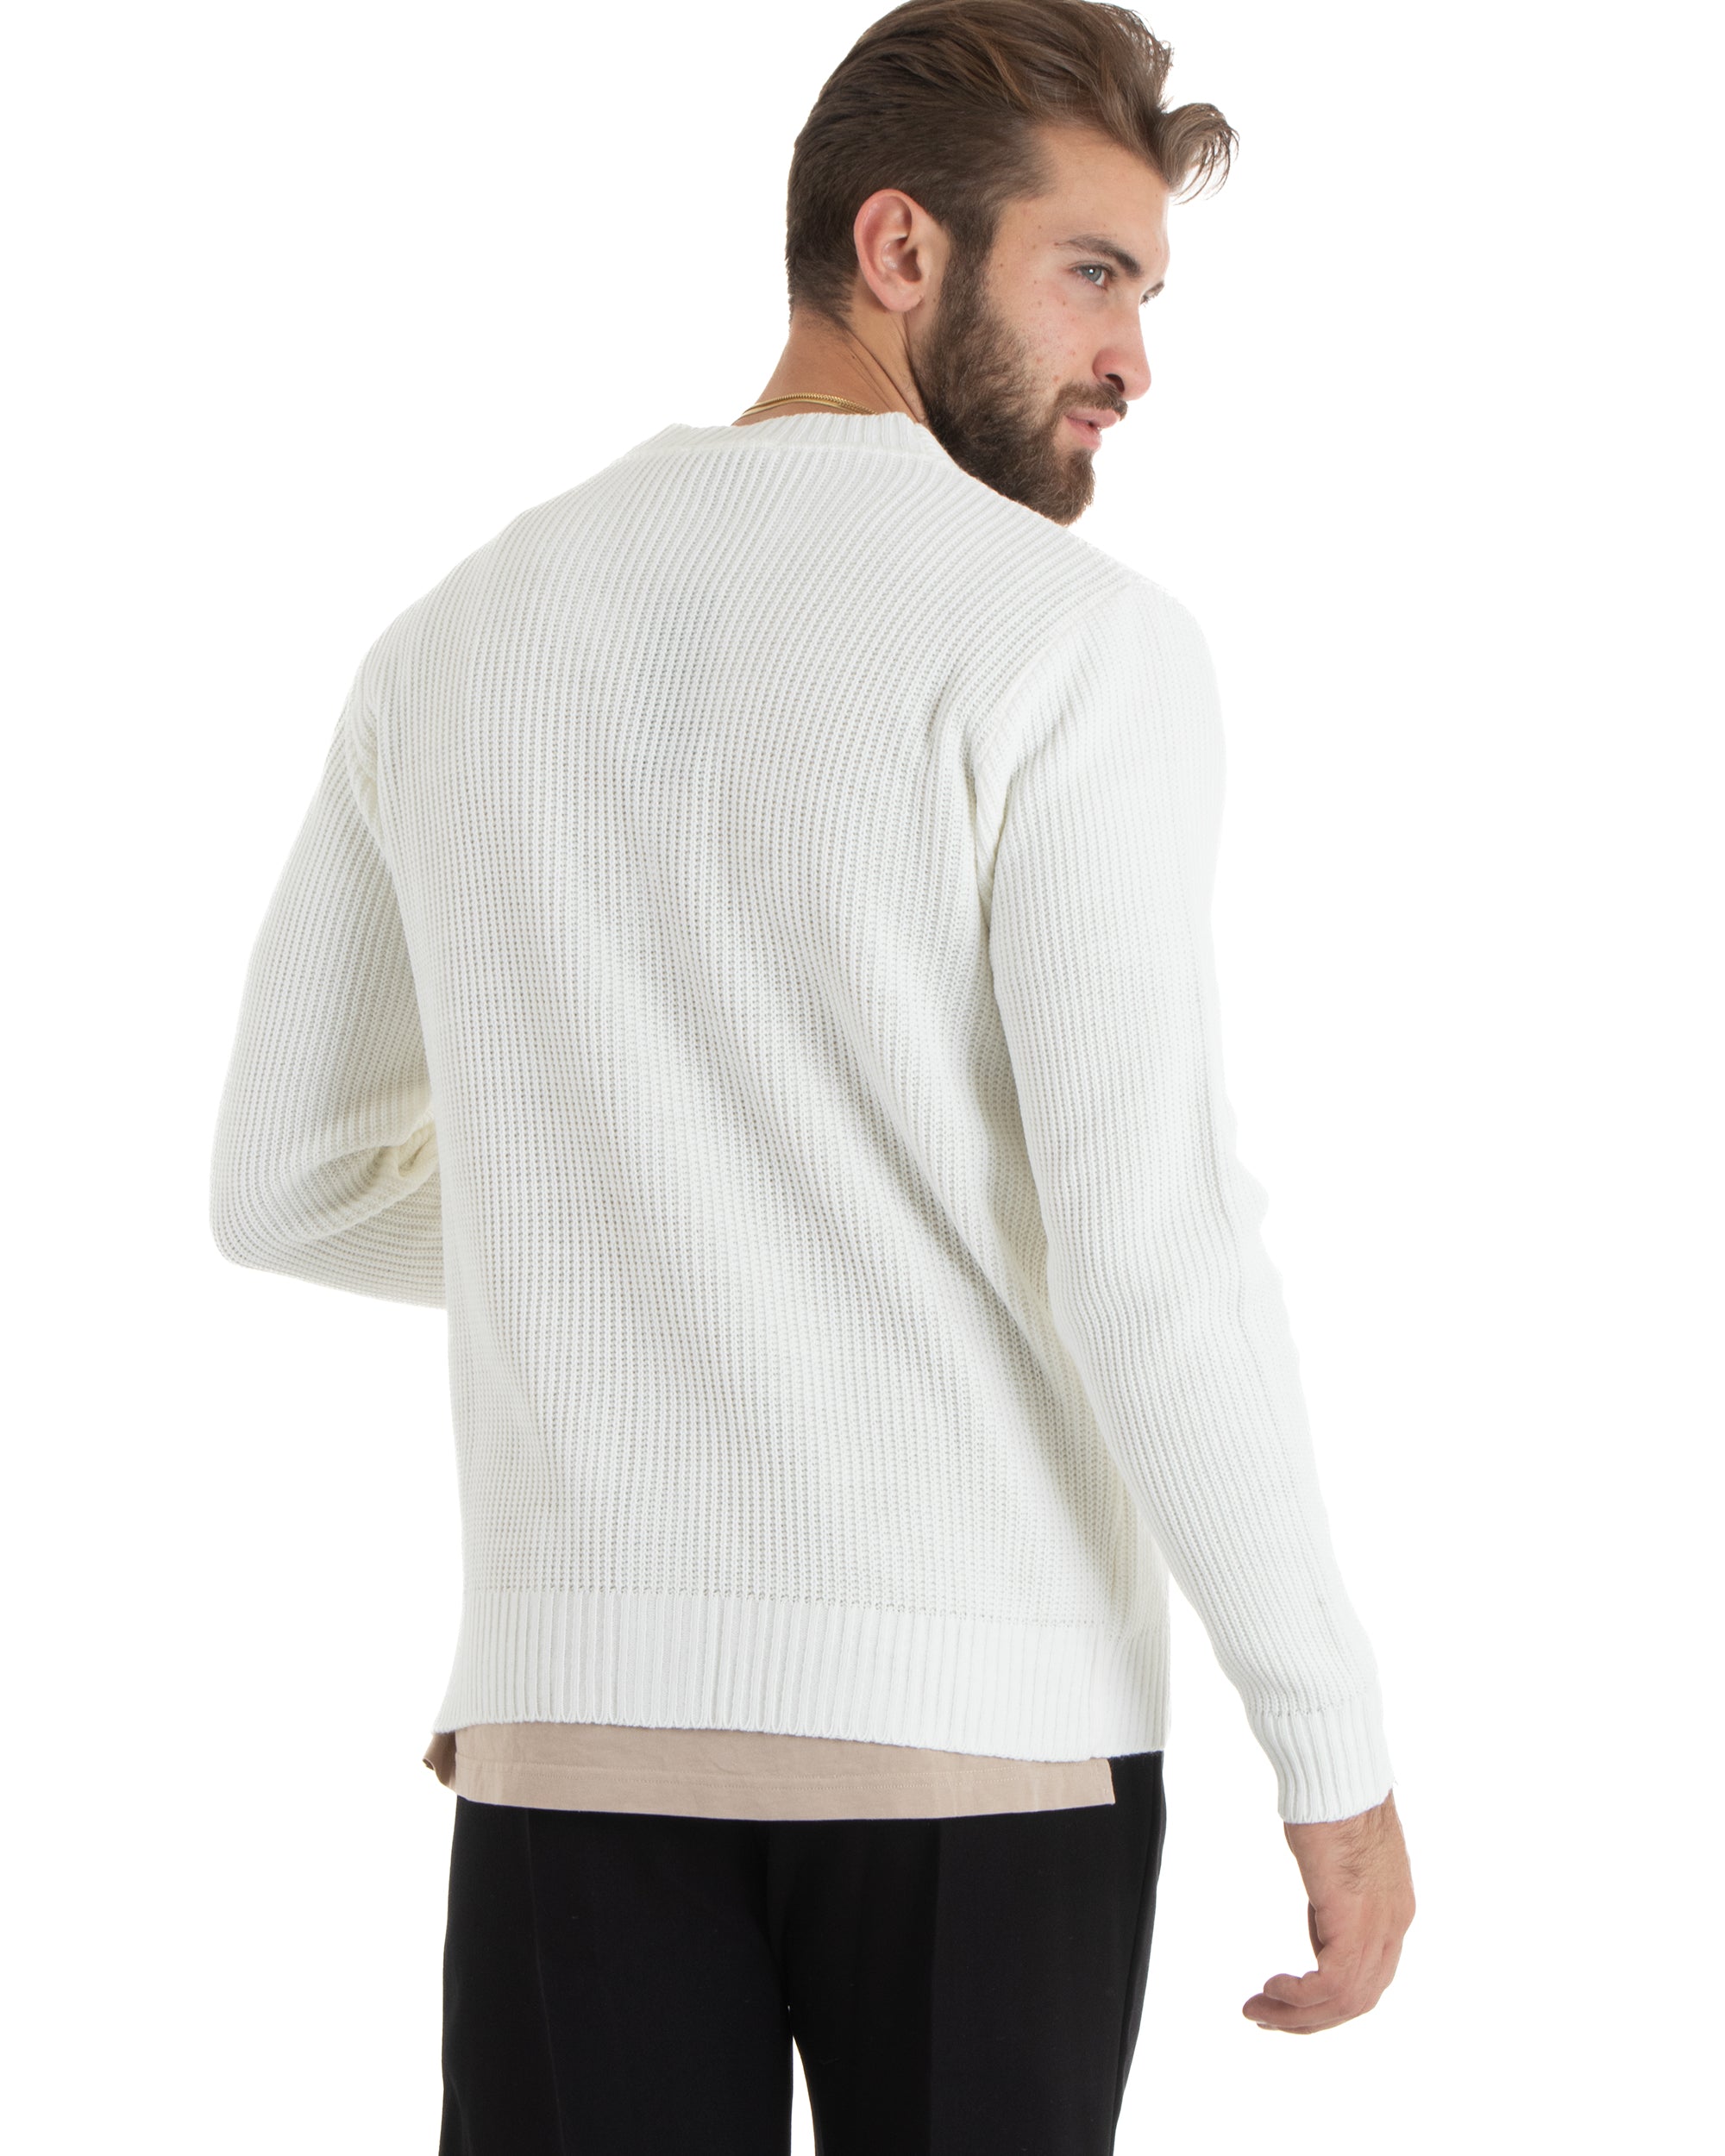 Men's Cardigan Jacket With Buttons V-Neck Sweater English Knit Cream GIOSAL-M2676A